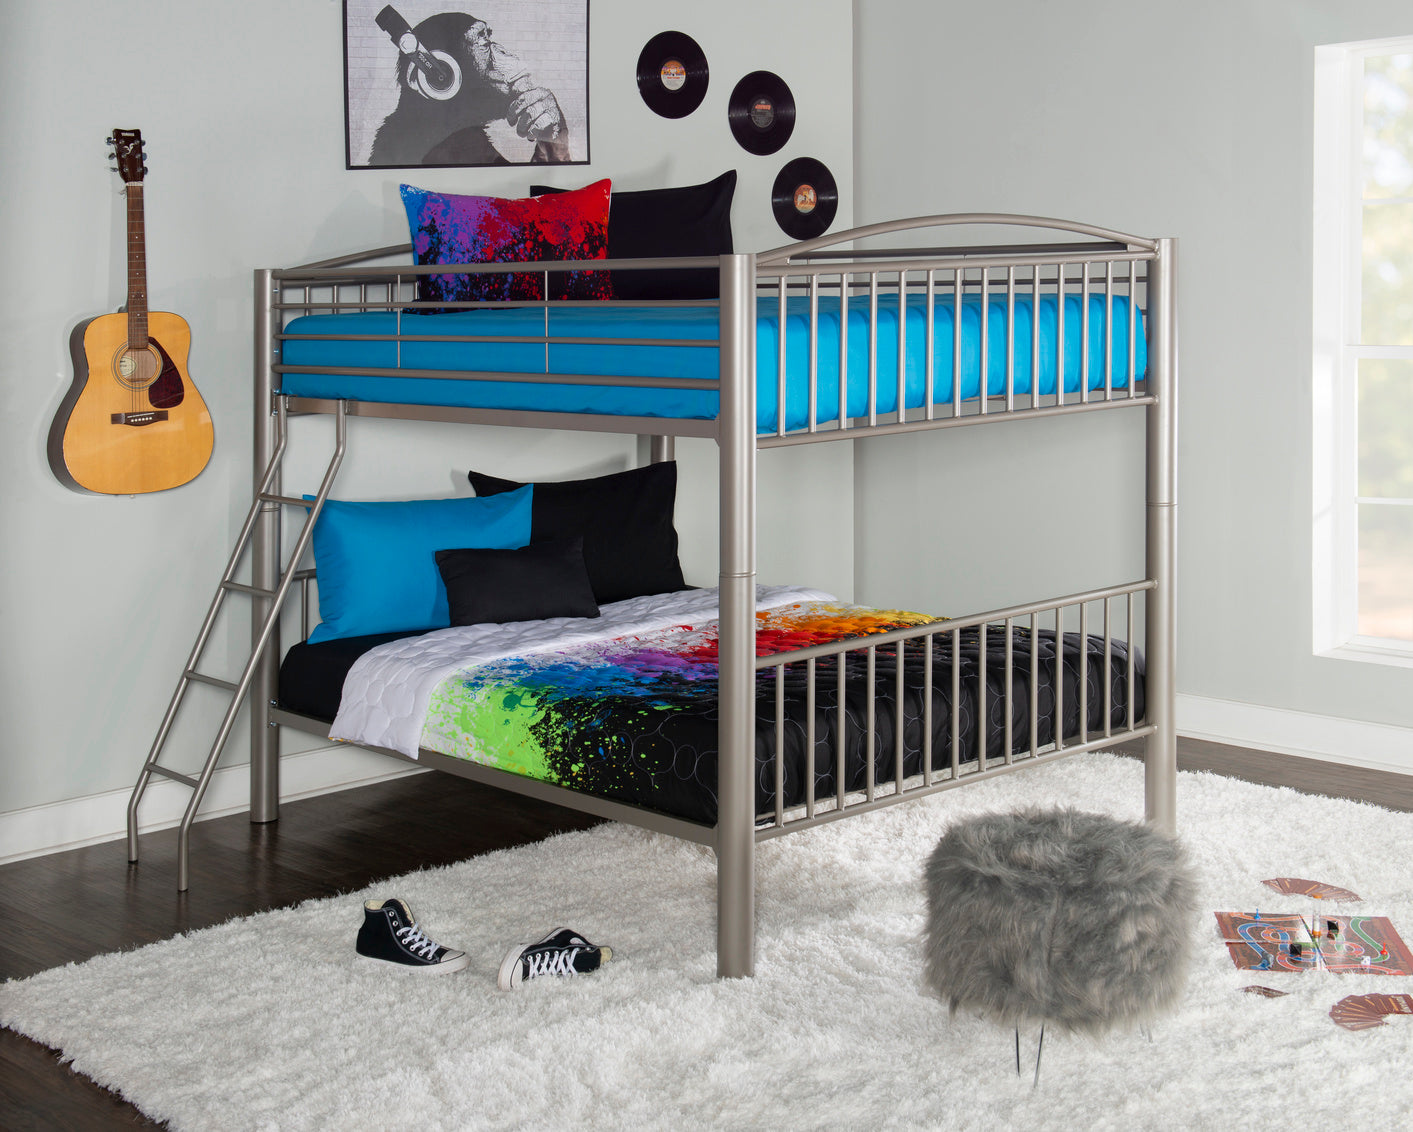 WEEKLY or MONTHLY. Bryson Pewter Twin over Full Metal Bunk Bed